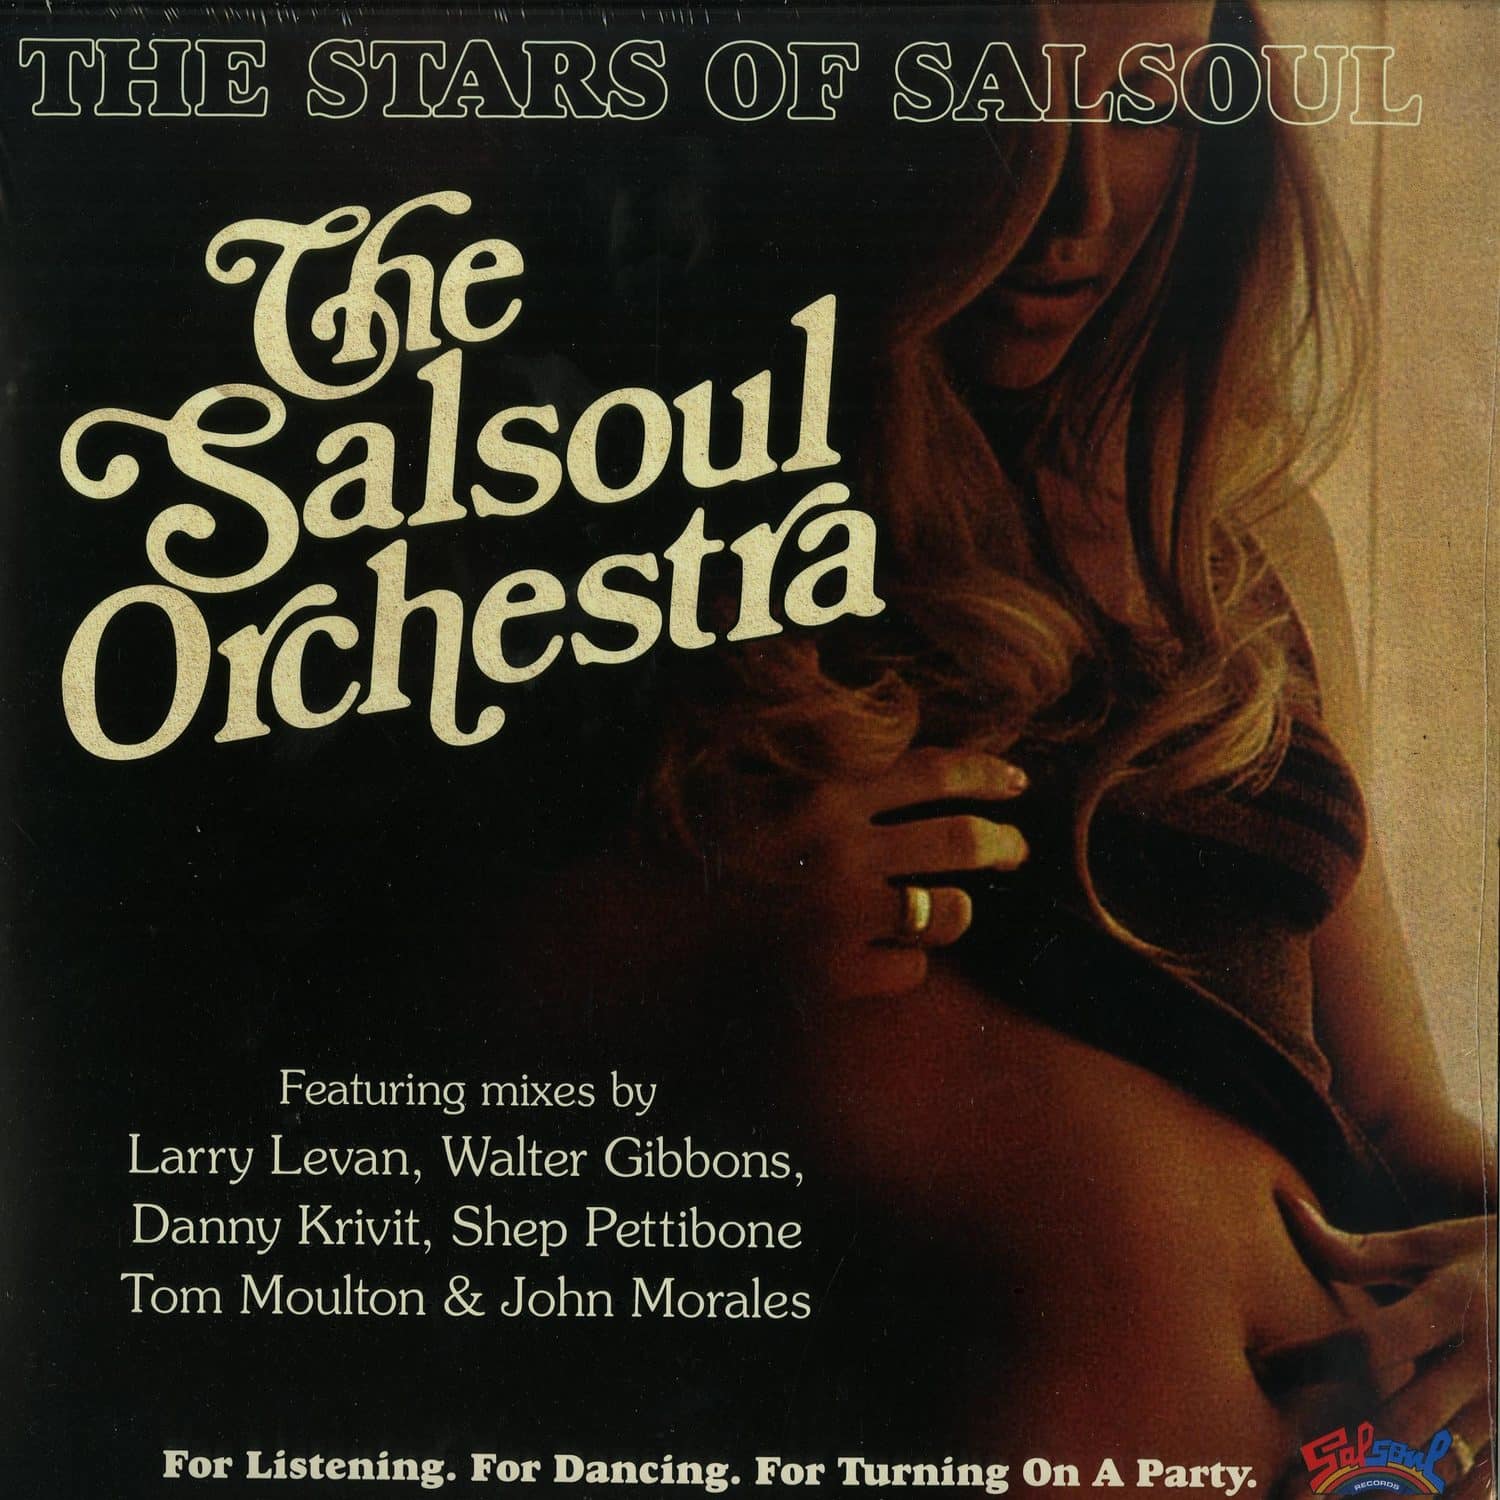 The Salsoul Orchestra - THE STARS OF SALSOUL 